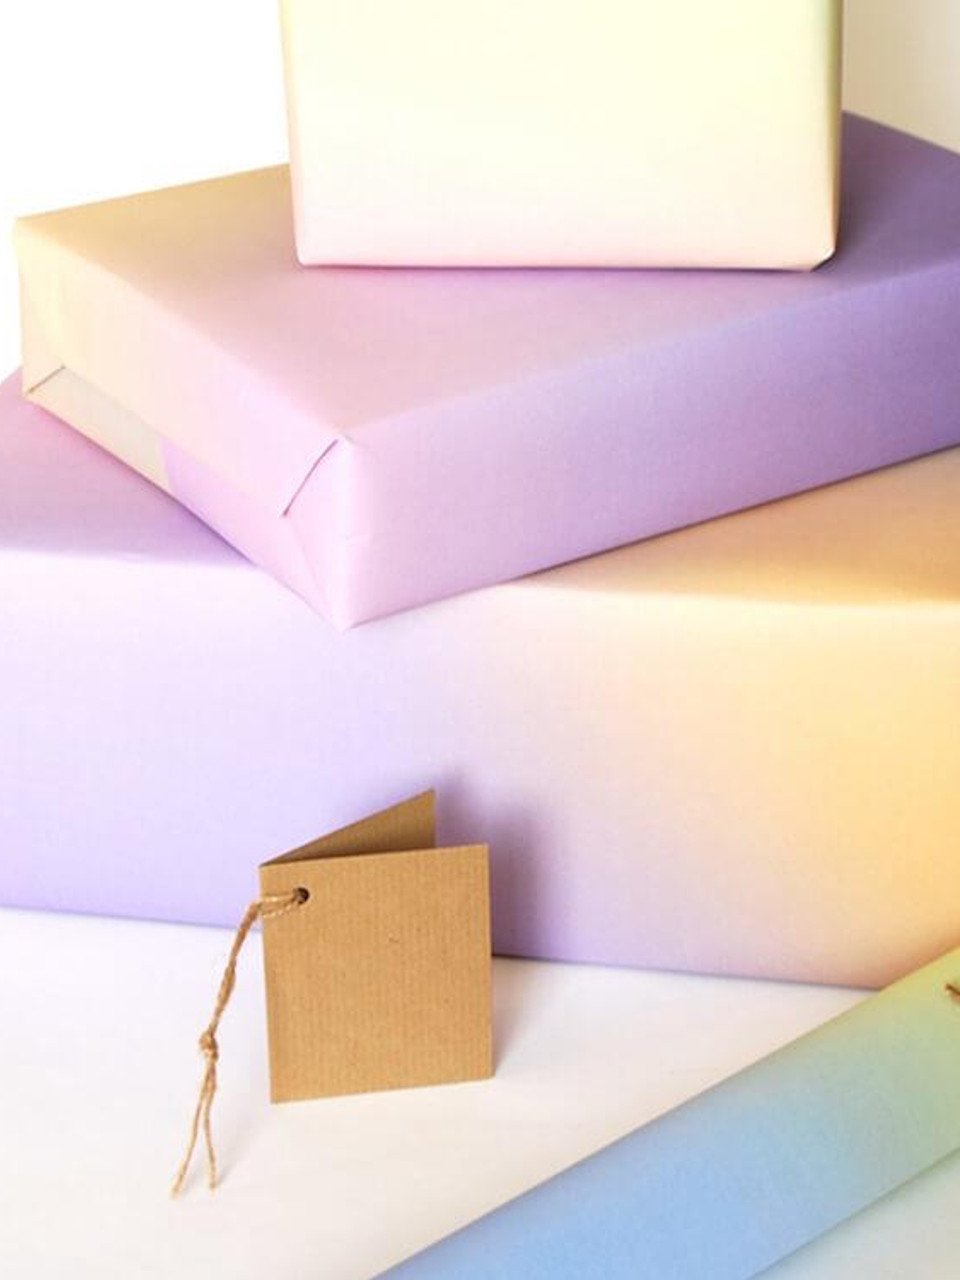 Living Lightly: Use recycled wrapping paper